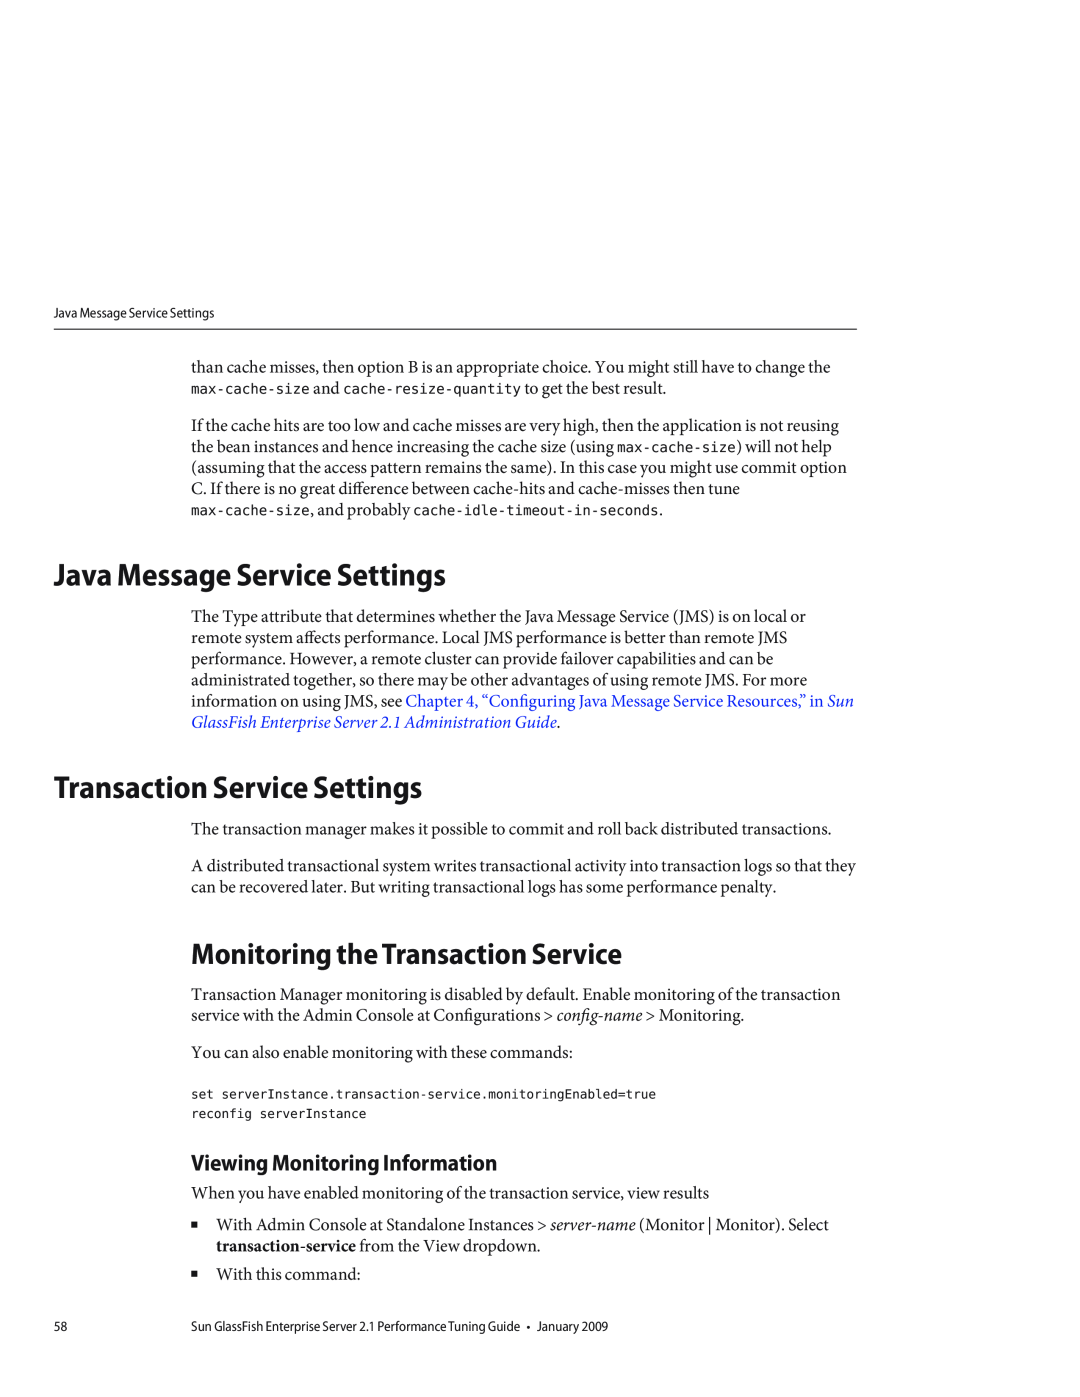 Sun Microsystems 820434310 Java Message Service Settings, Transaction Service Settings, Monitoring the Transaction Service 